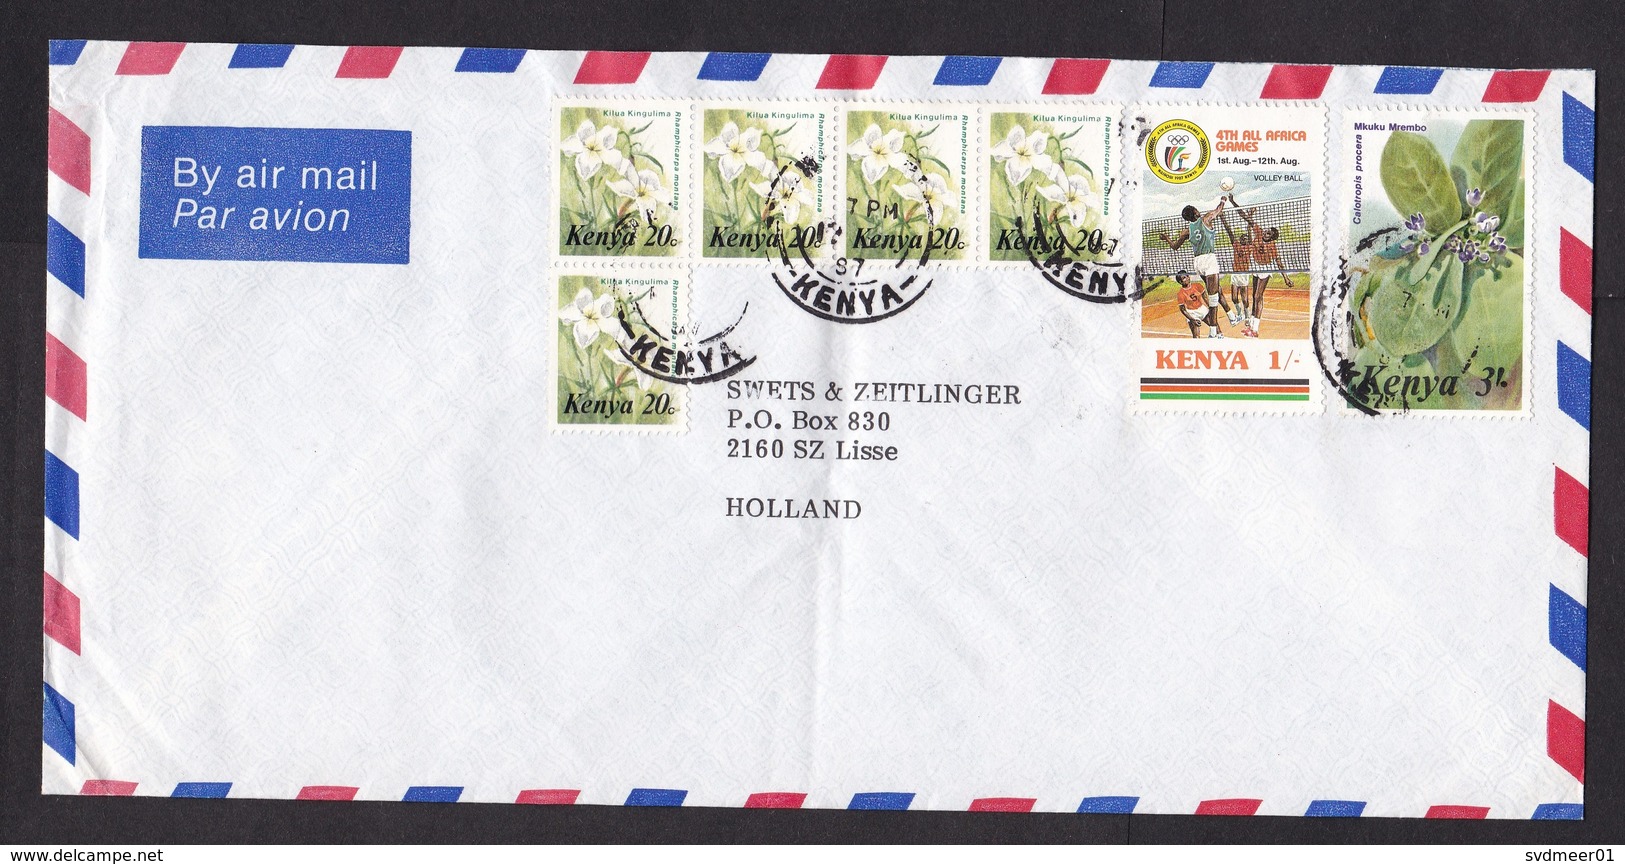 Kenya: Airmail Cover To Netherlands, 1997, 7 Stamps, Volleyball, Africa Games, Ball Sports, Flowers (minor Crease) - Kenya (1963-...)